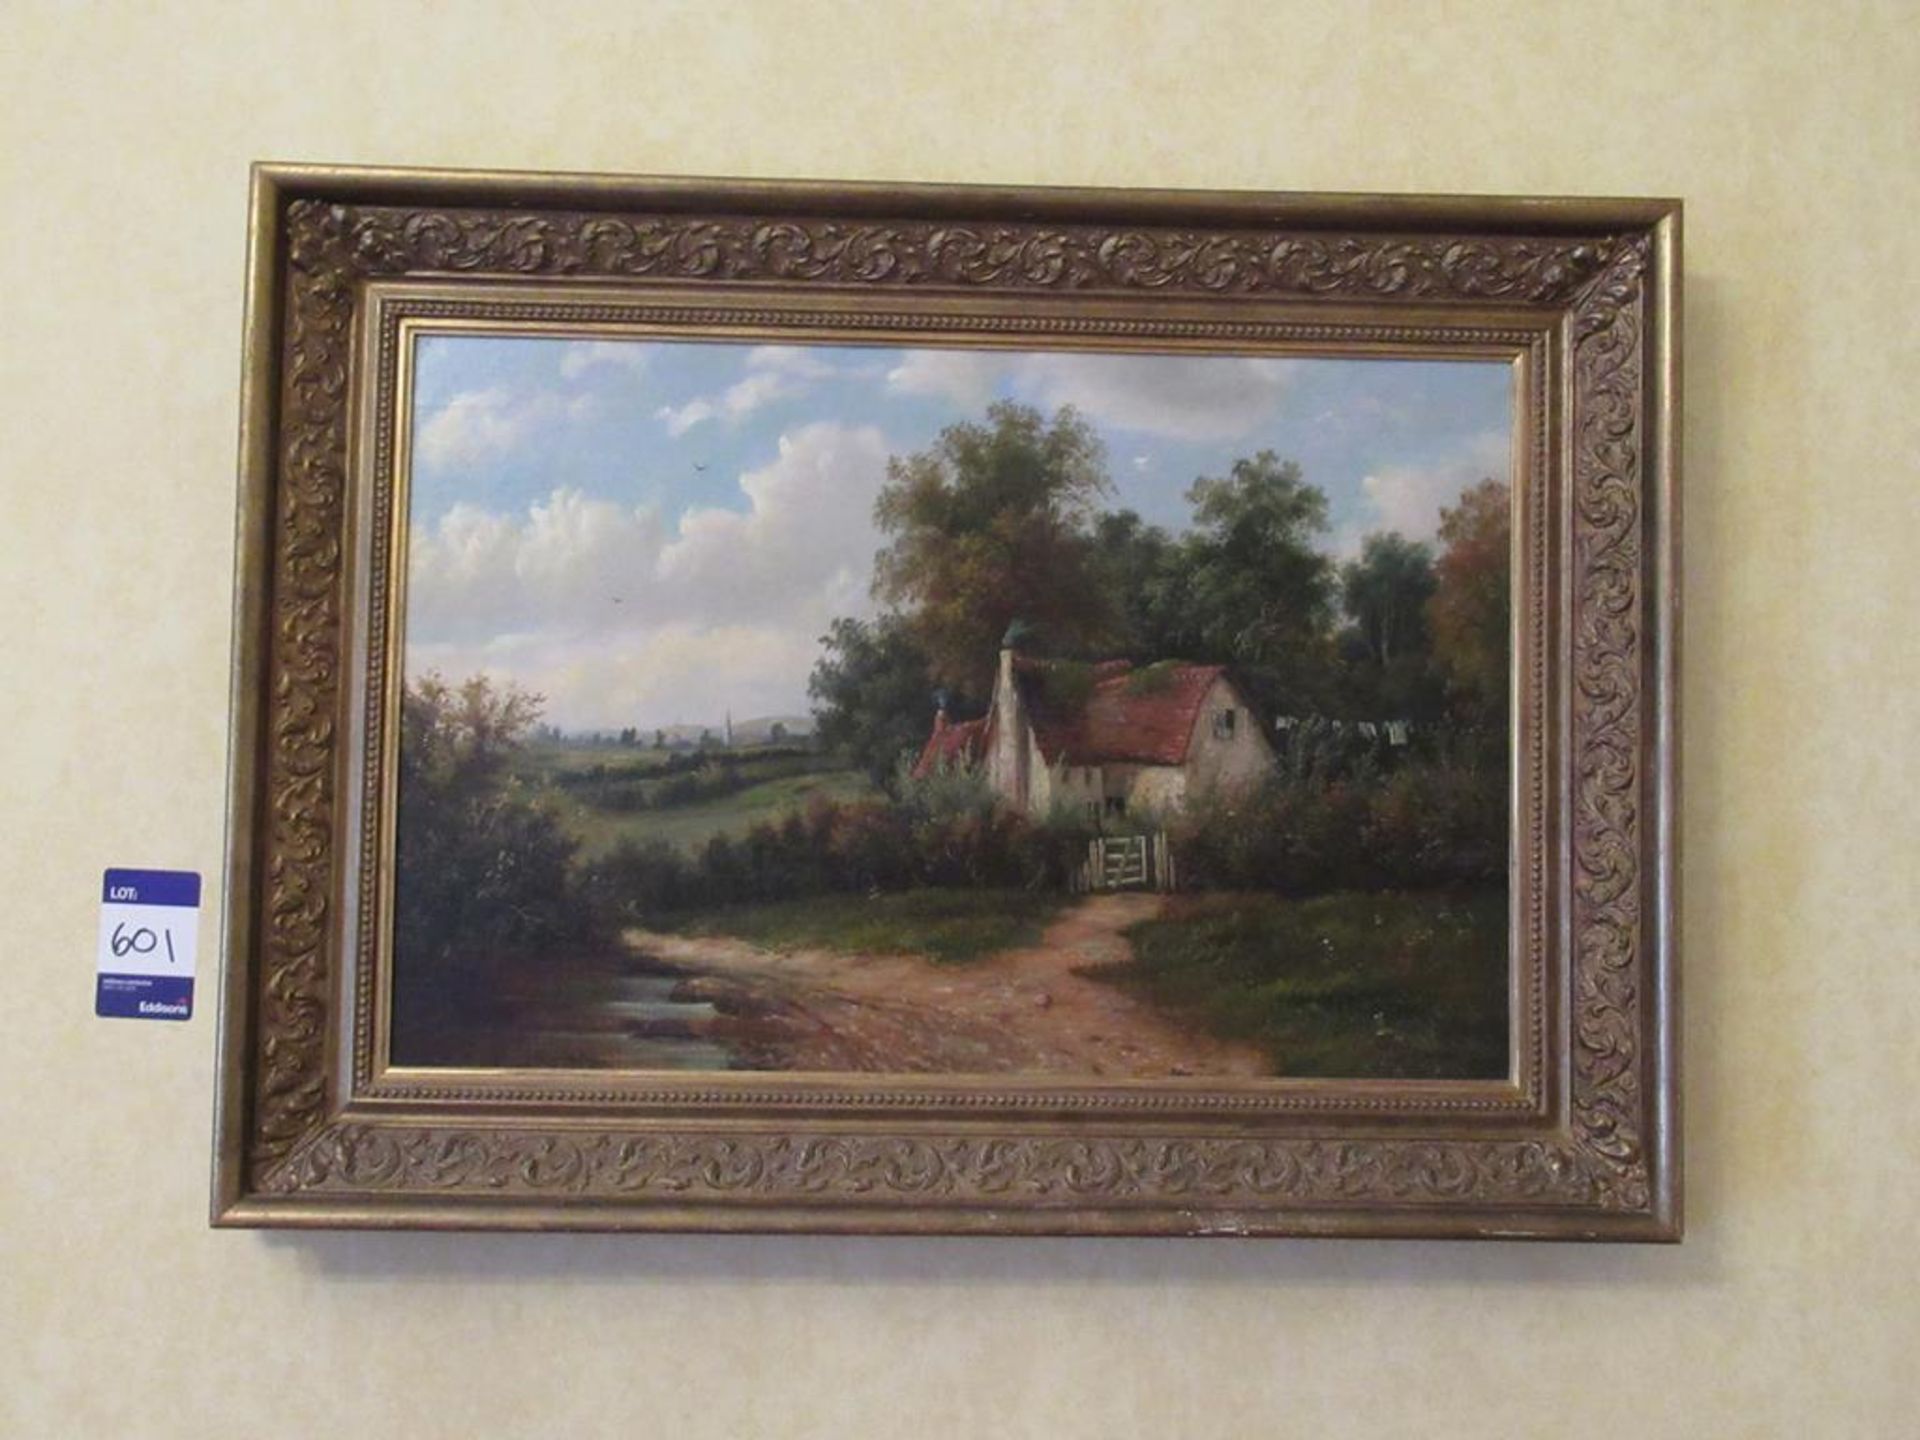 Artwork - oil on canvas depicting country cottage with washing signed …. In gilded frame